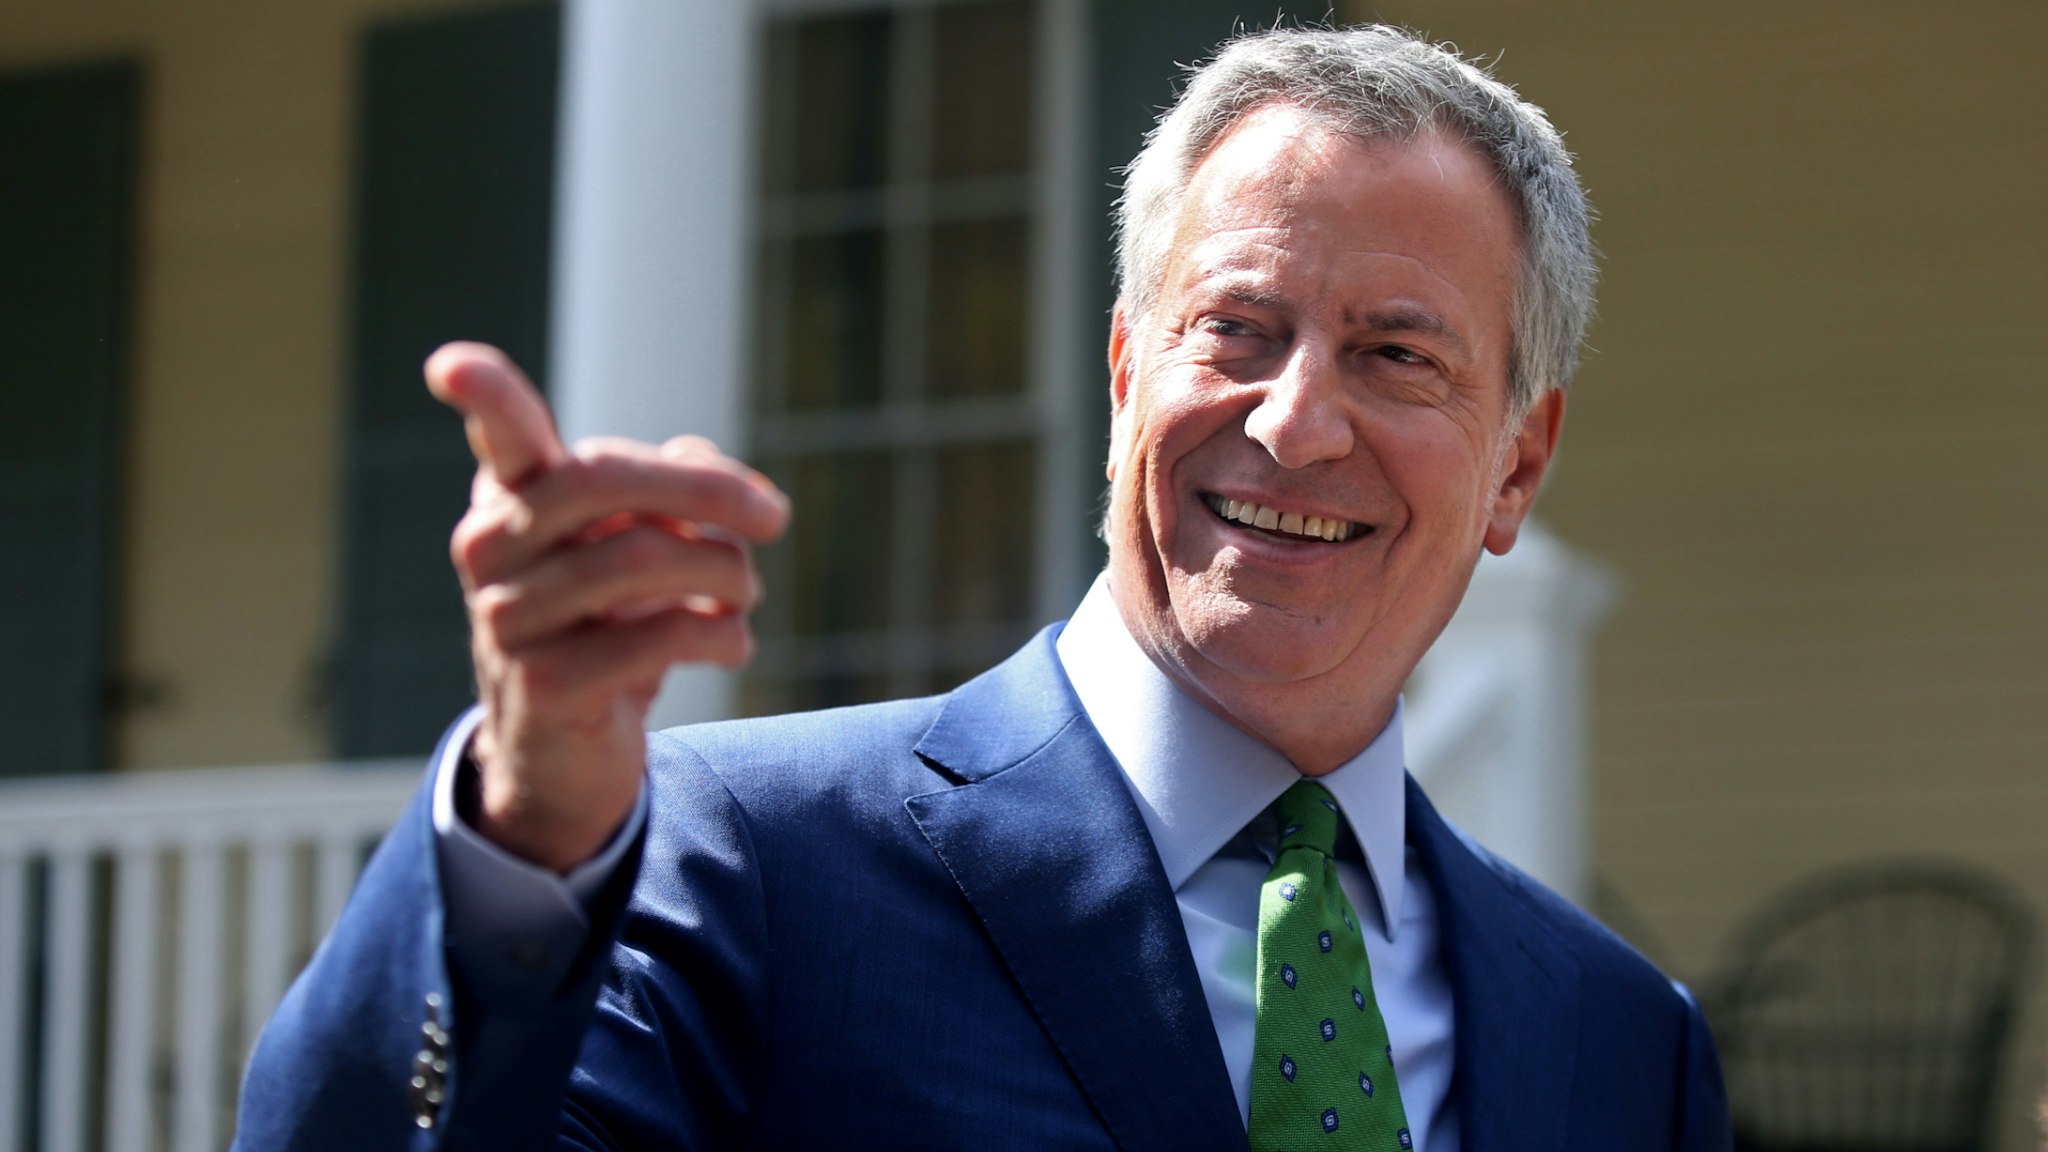 New York City Mayor Bill de Blasio speaks during a press conference held in front of Gracie Mansion on September 20, 2019 in New York City.